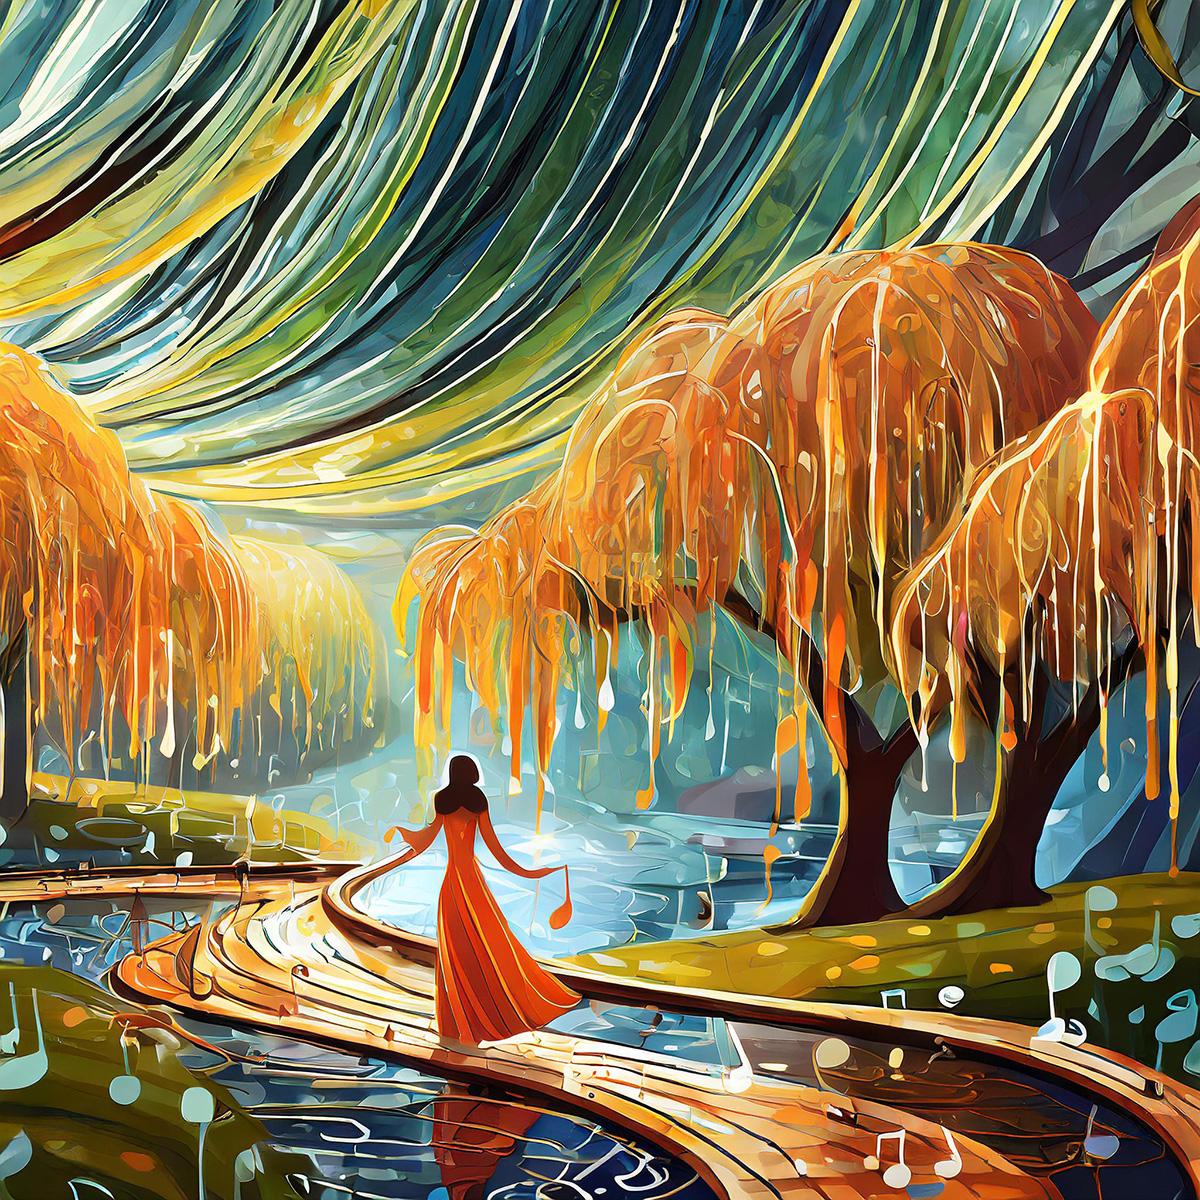 dreamy, artistic scene: a woman in a dress on a boardwalk over water between weeping willows. Rain forms into music notes